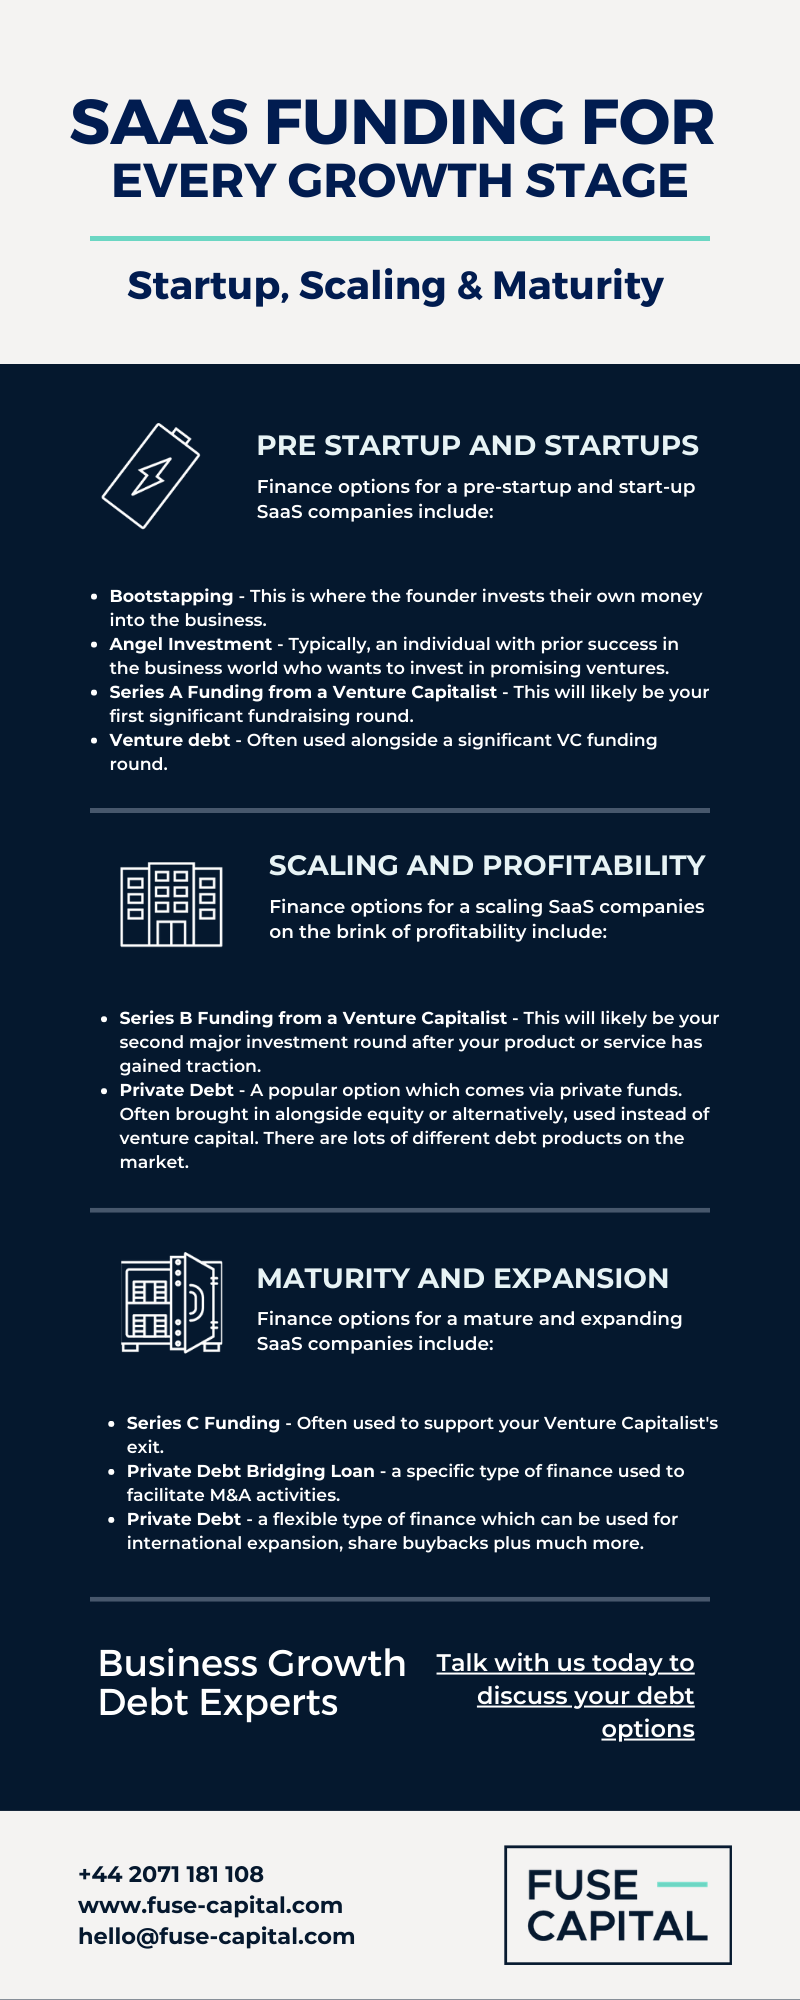 Take 3 minutes to learn about SaaS growth funding options - Fuse